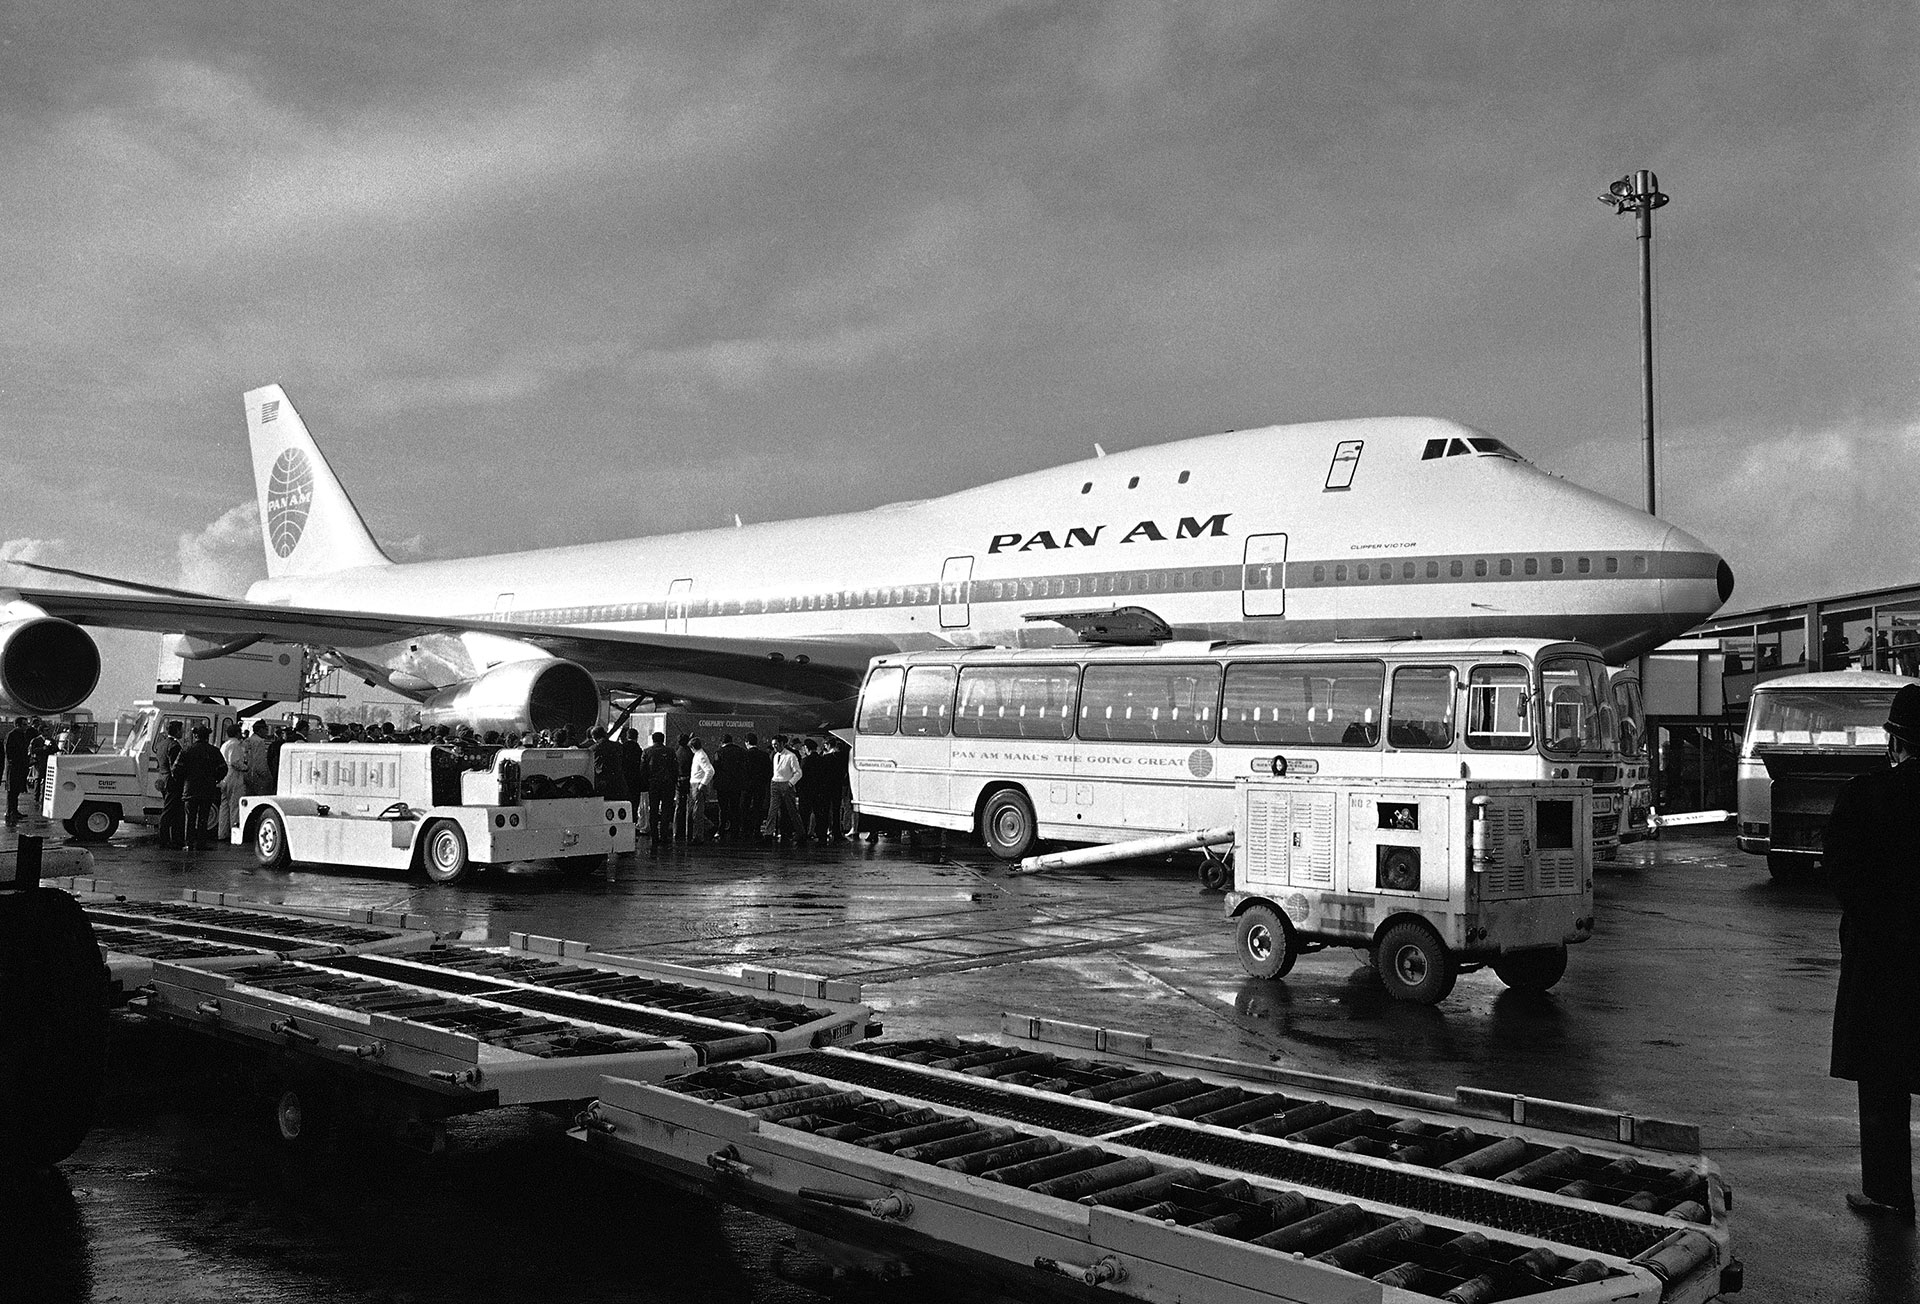 A Pan Am Boeing 747 at London's Heathrow Airport after its first commercial transatlantic flight from New York on January 22, 1970. AP/Lawrence Harris/File